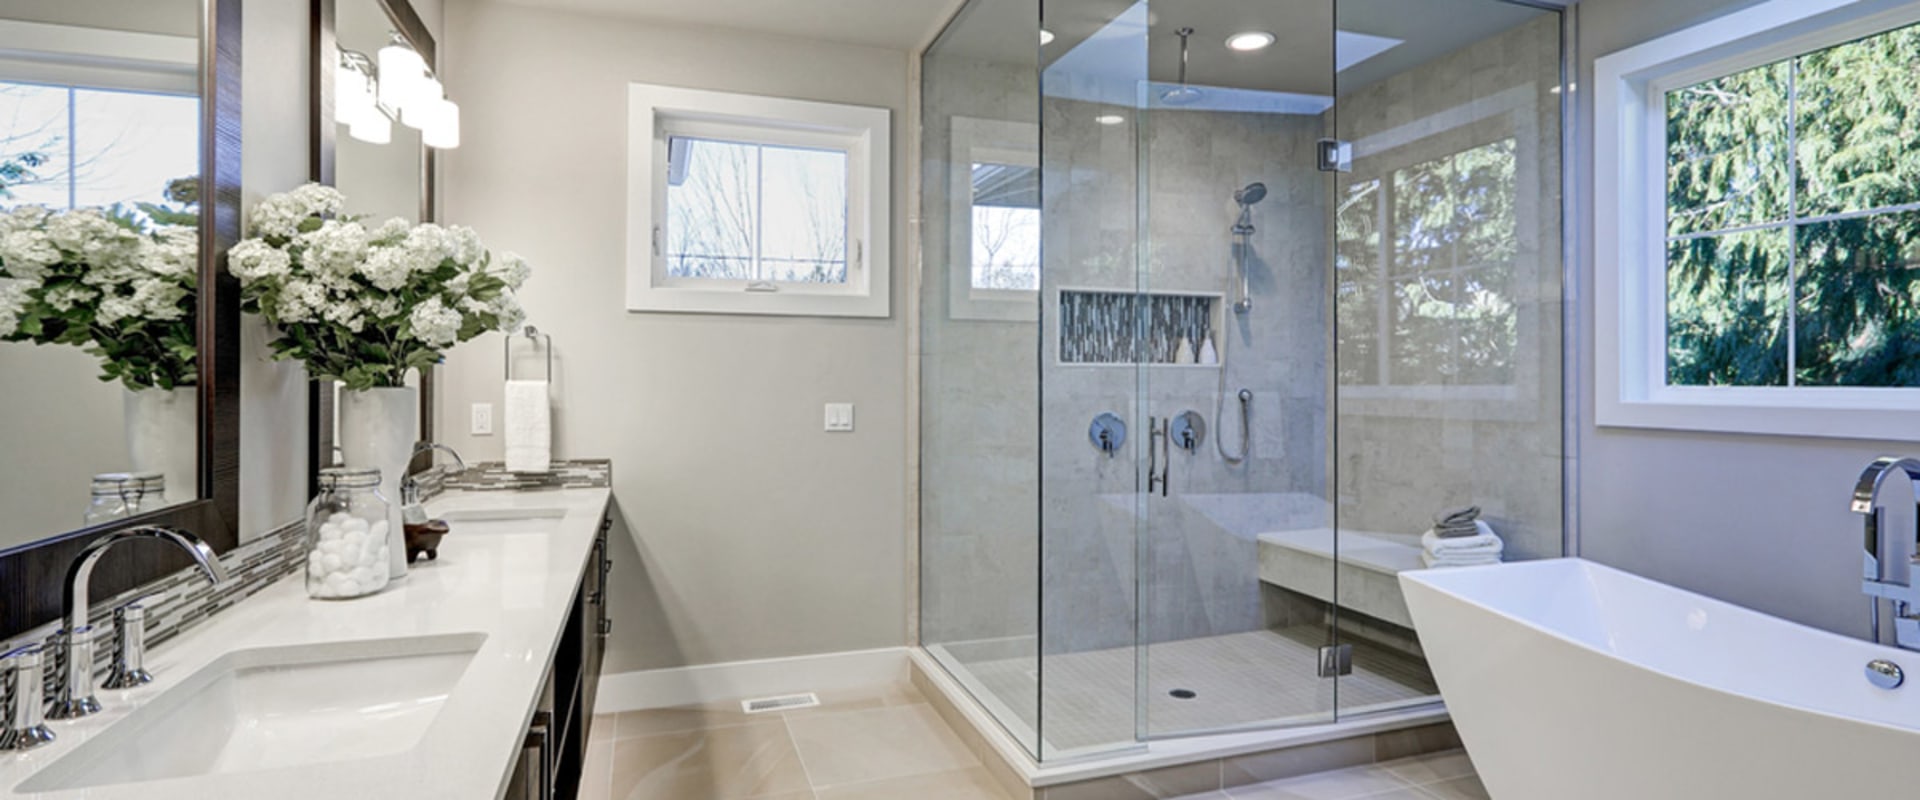 How Much Does it Cost to Install Frameless Shower Doors?